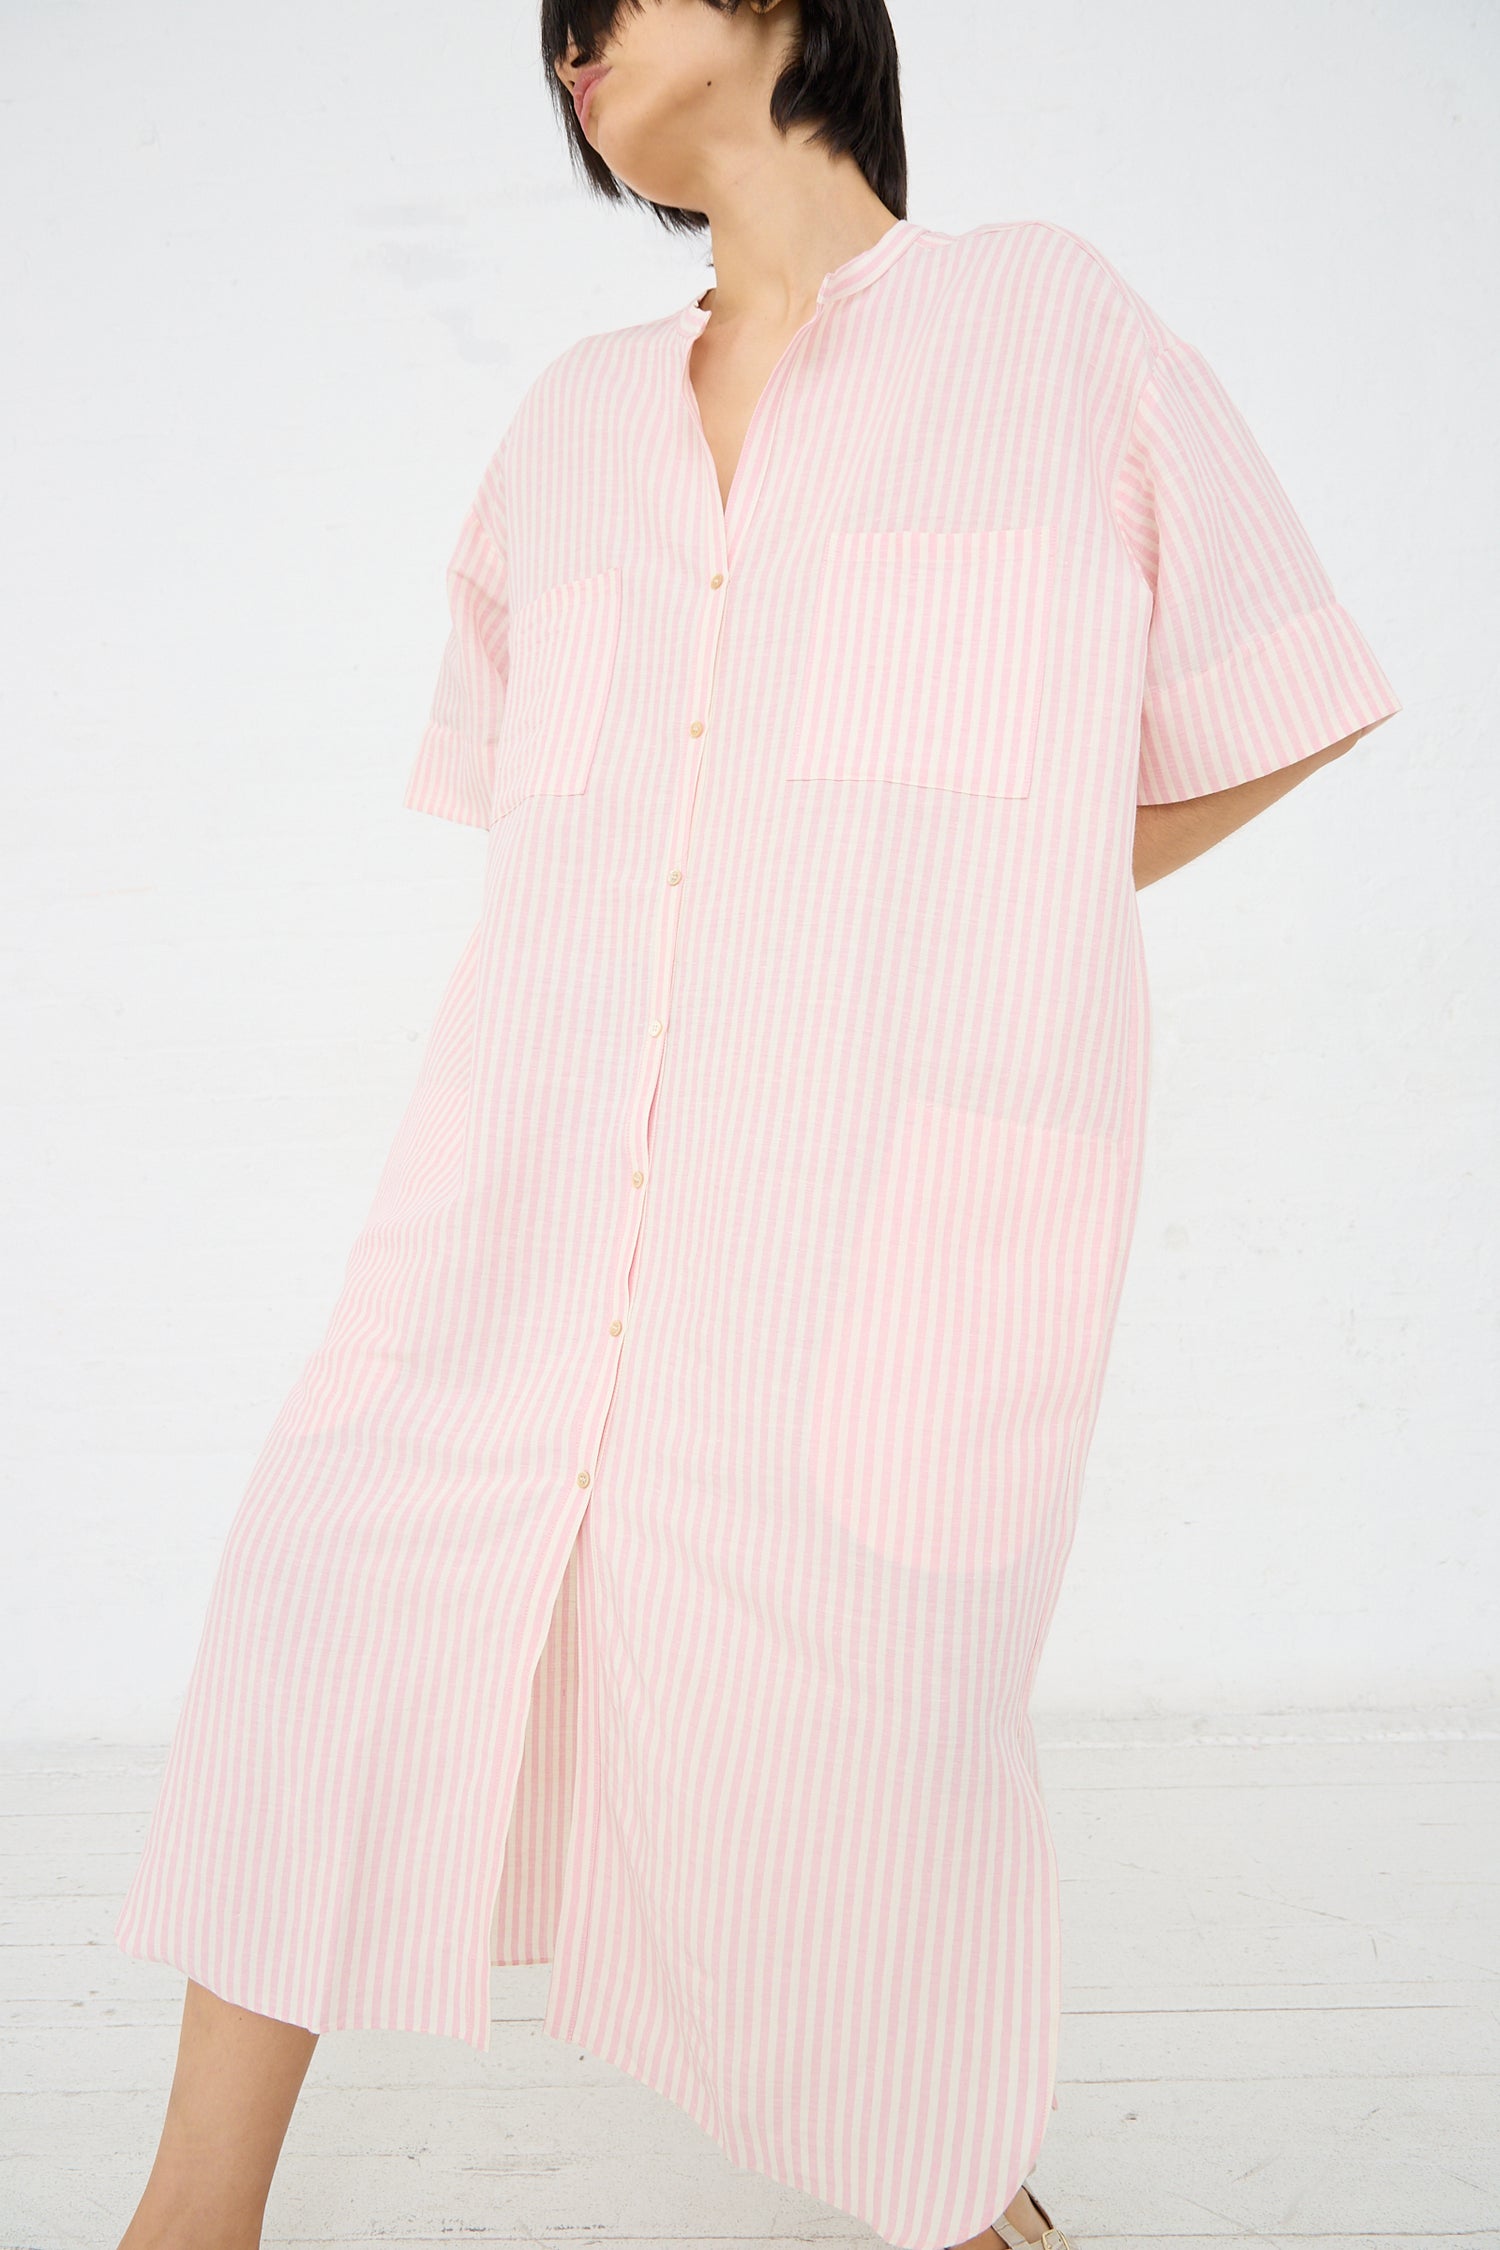 A person wearing a Caron Callahan Linen Stripe Kalloni Dress in Pink, standing against a white background.